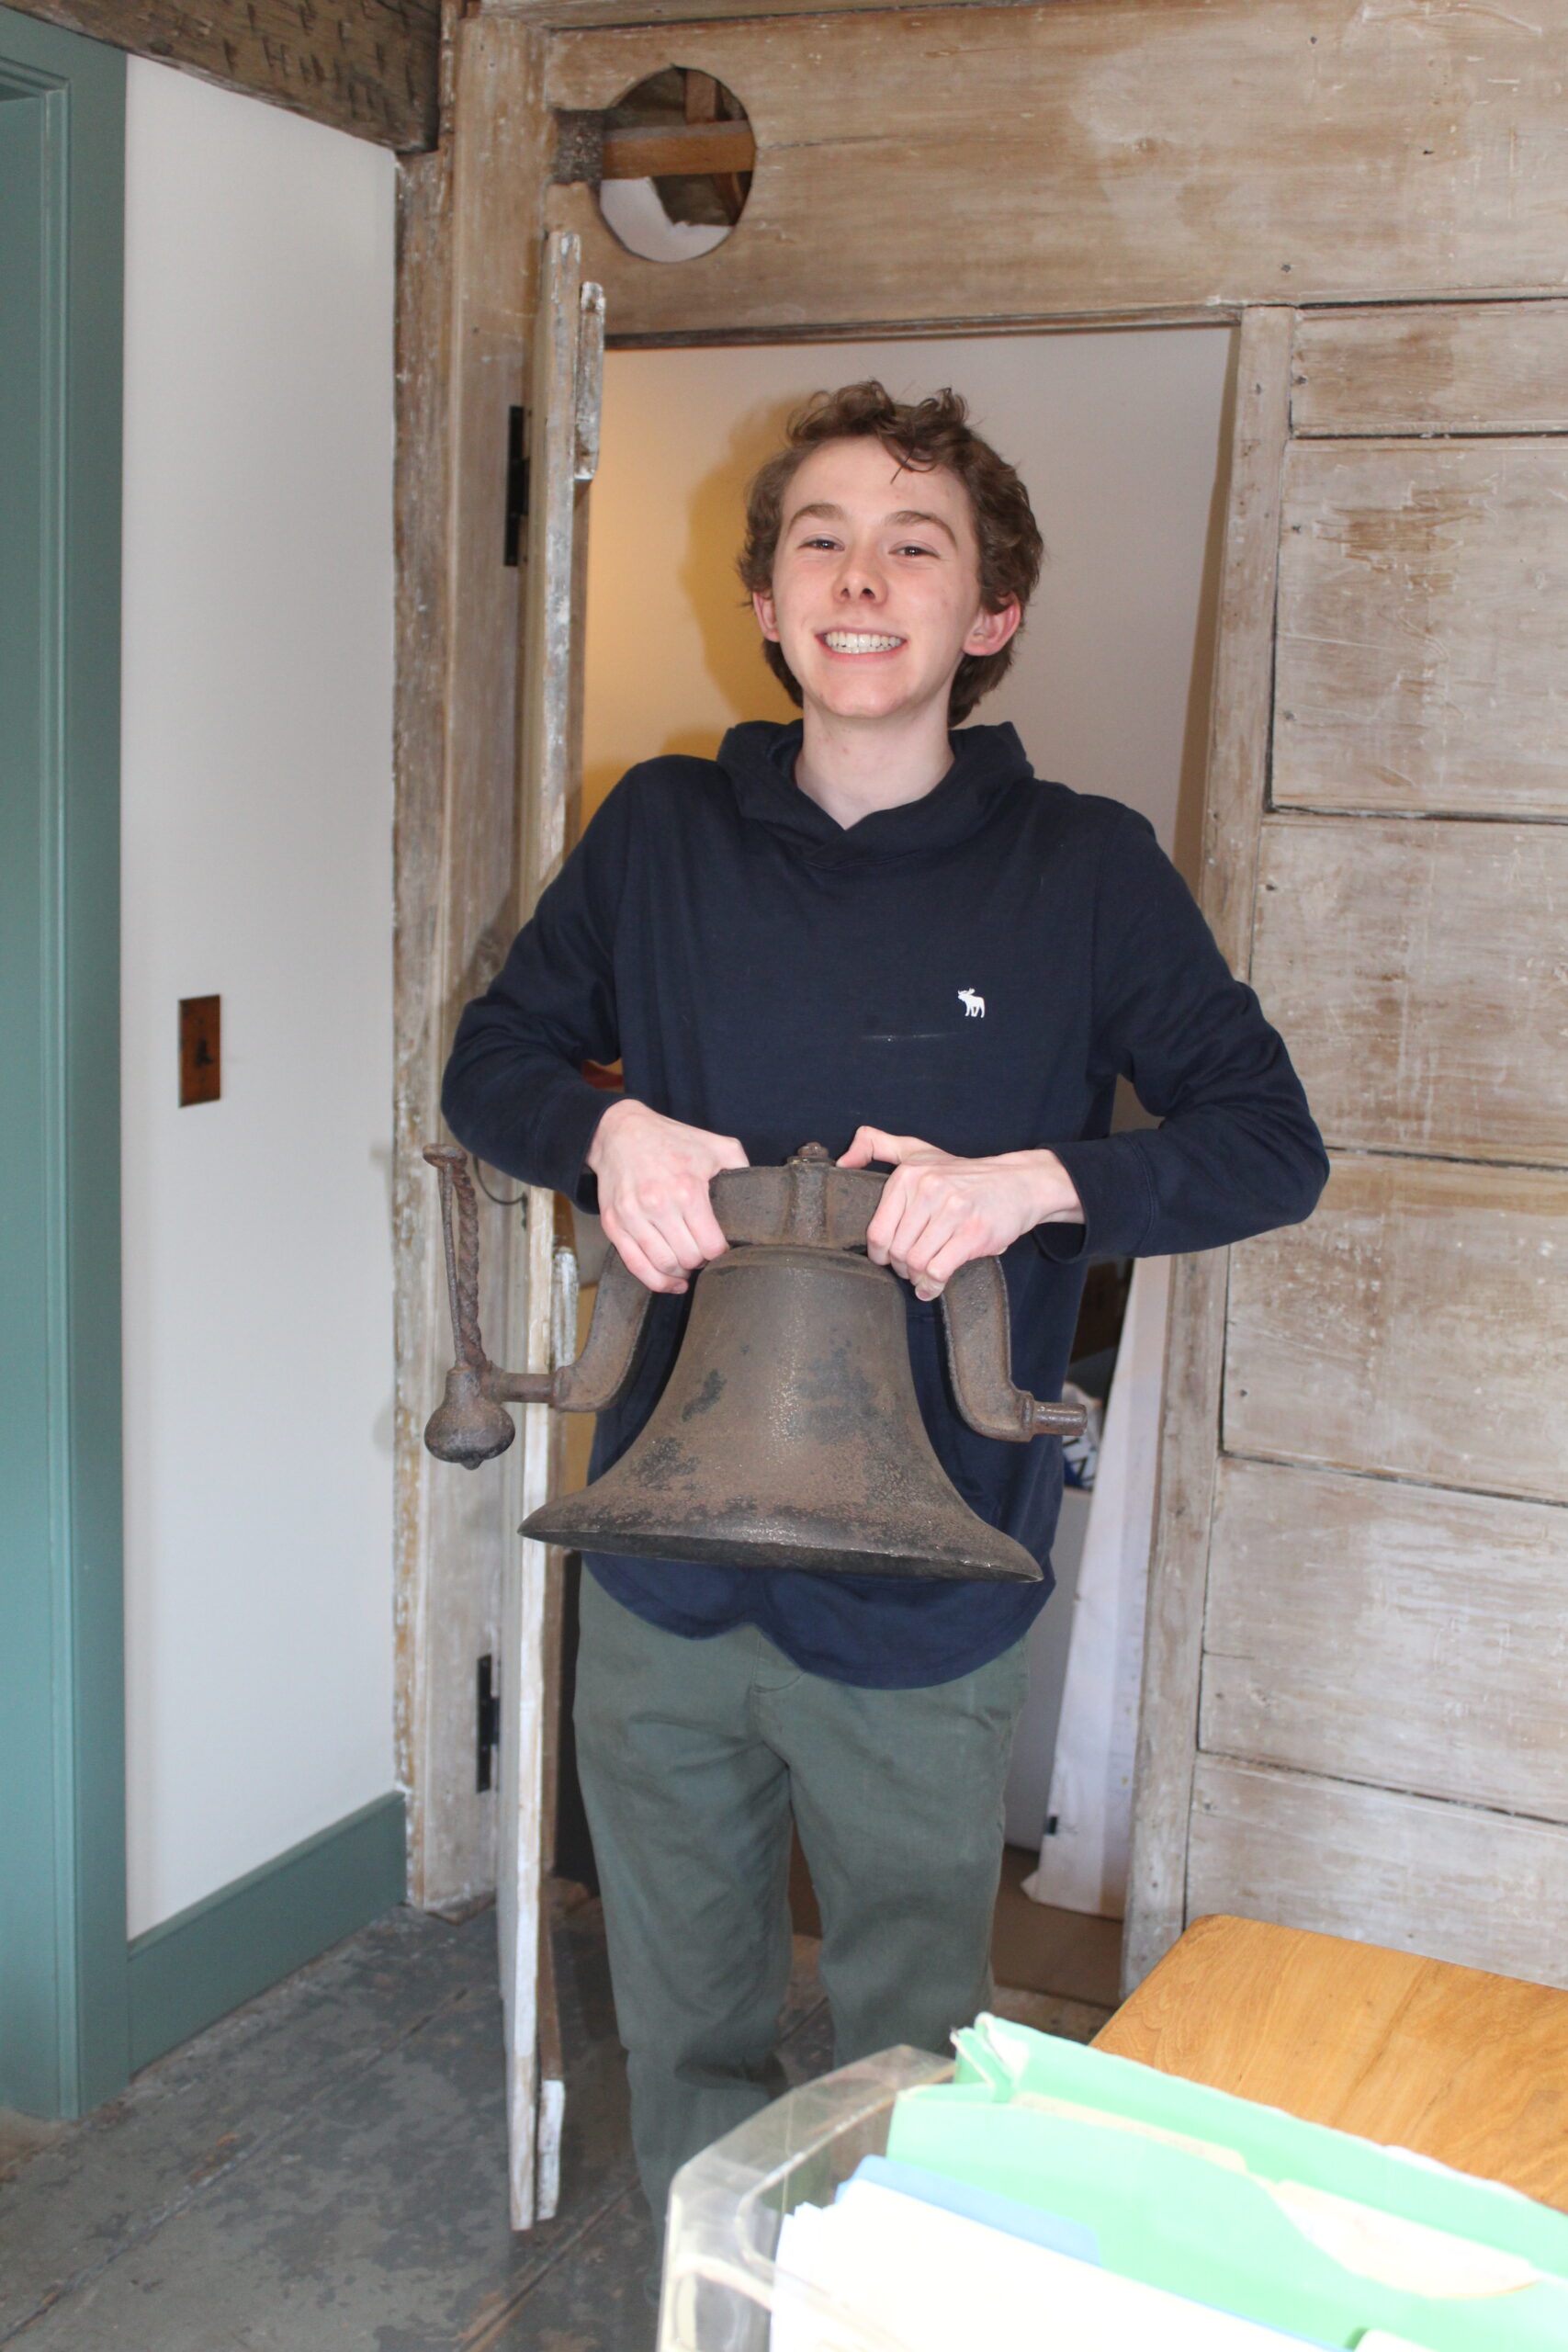 That School Bell Weighs 50 Pounds!